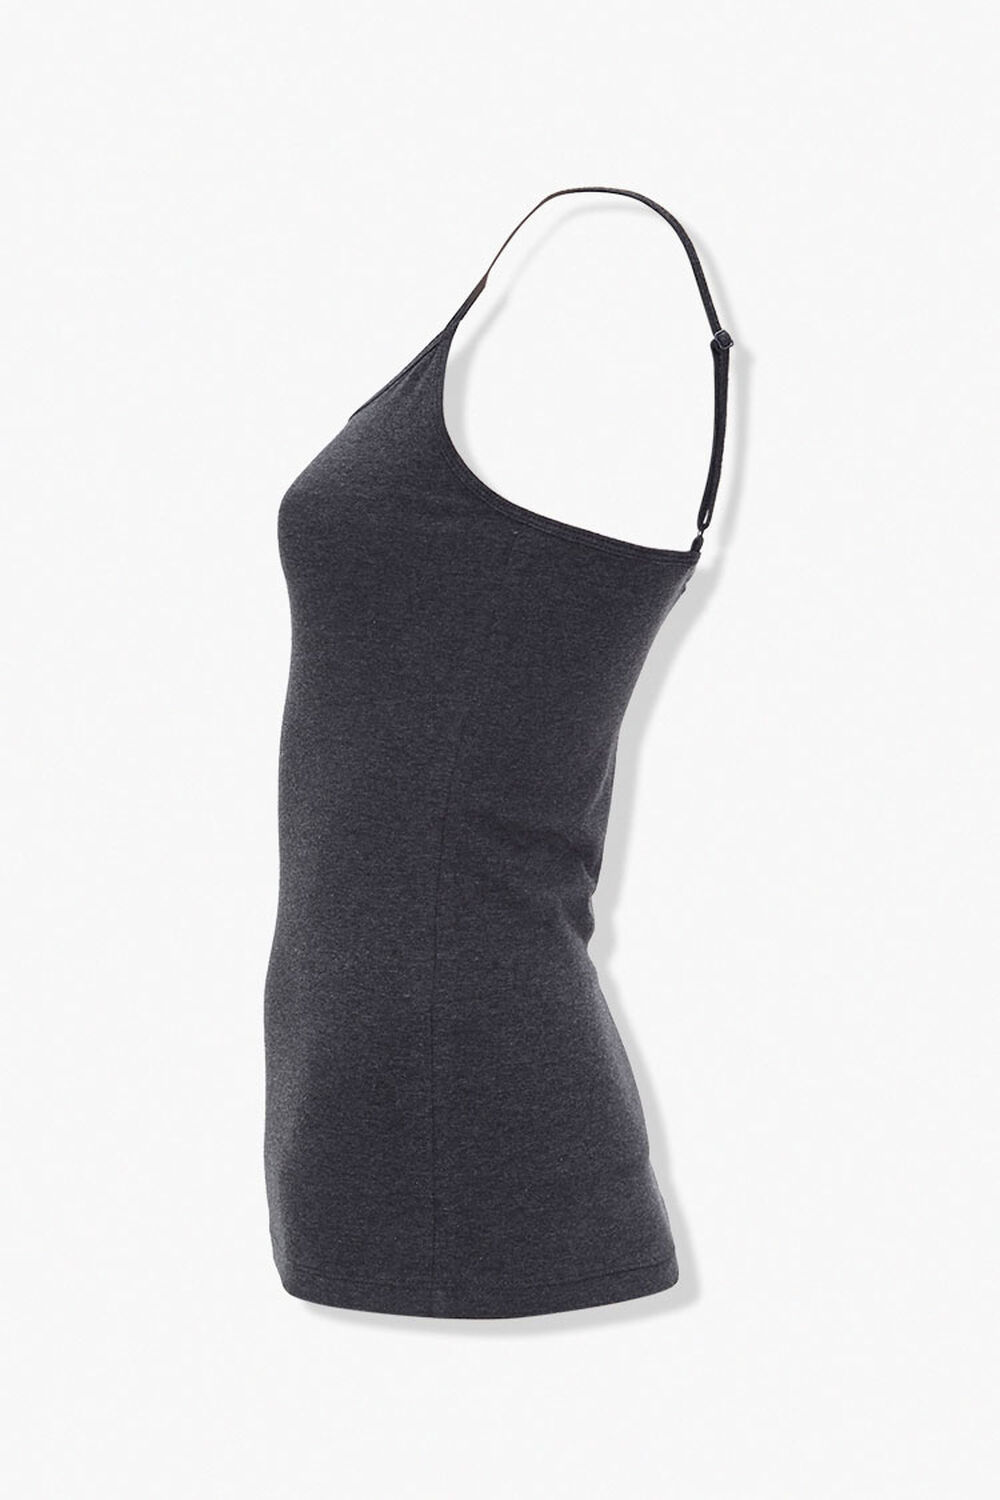 CHARCOAL HEATHER Basic Cotton-Blend Cami, image 2